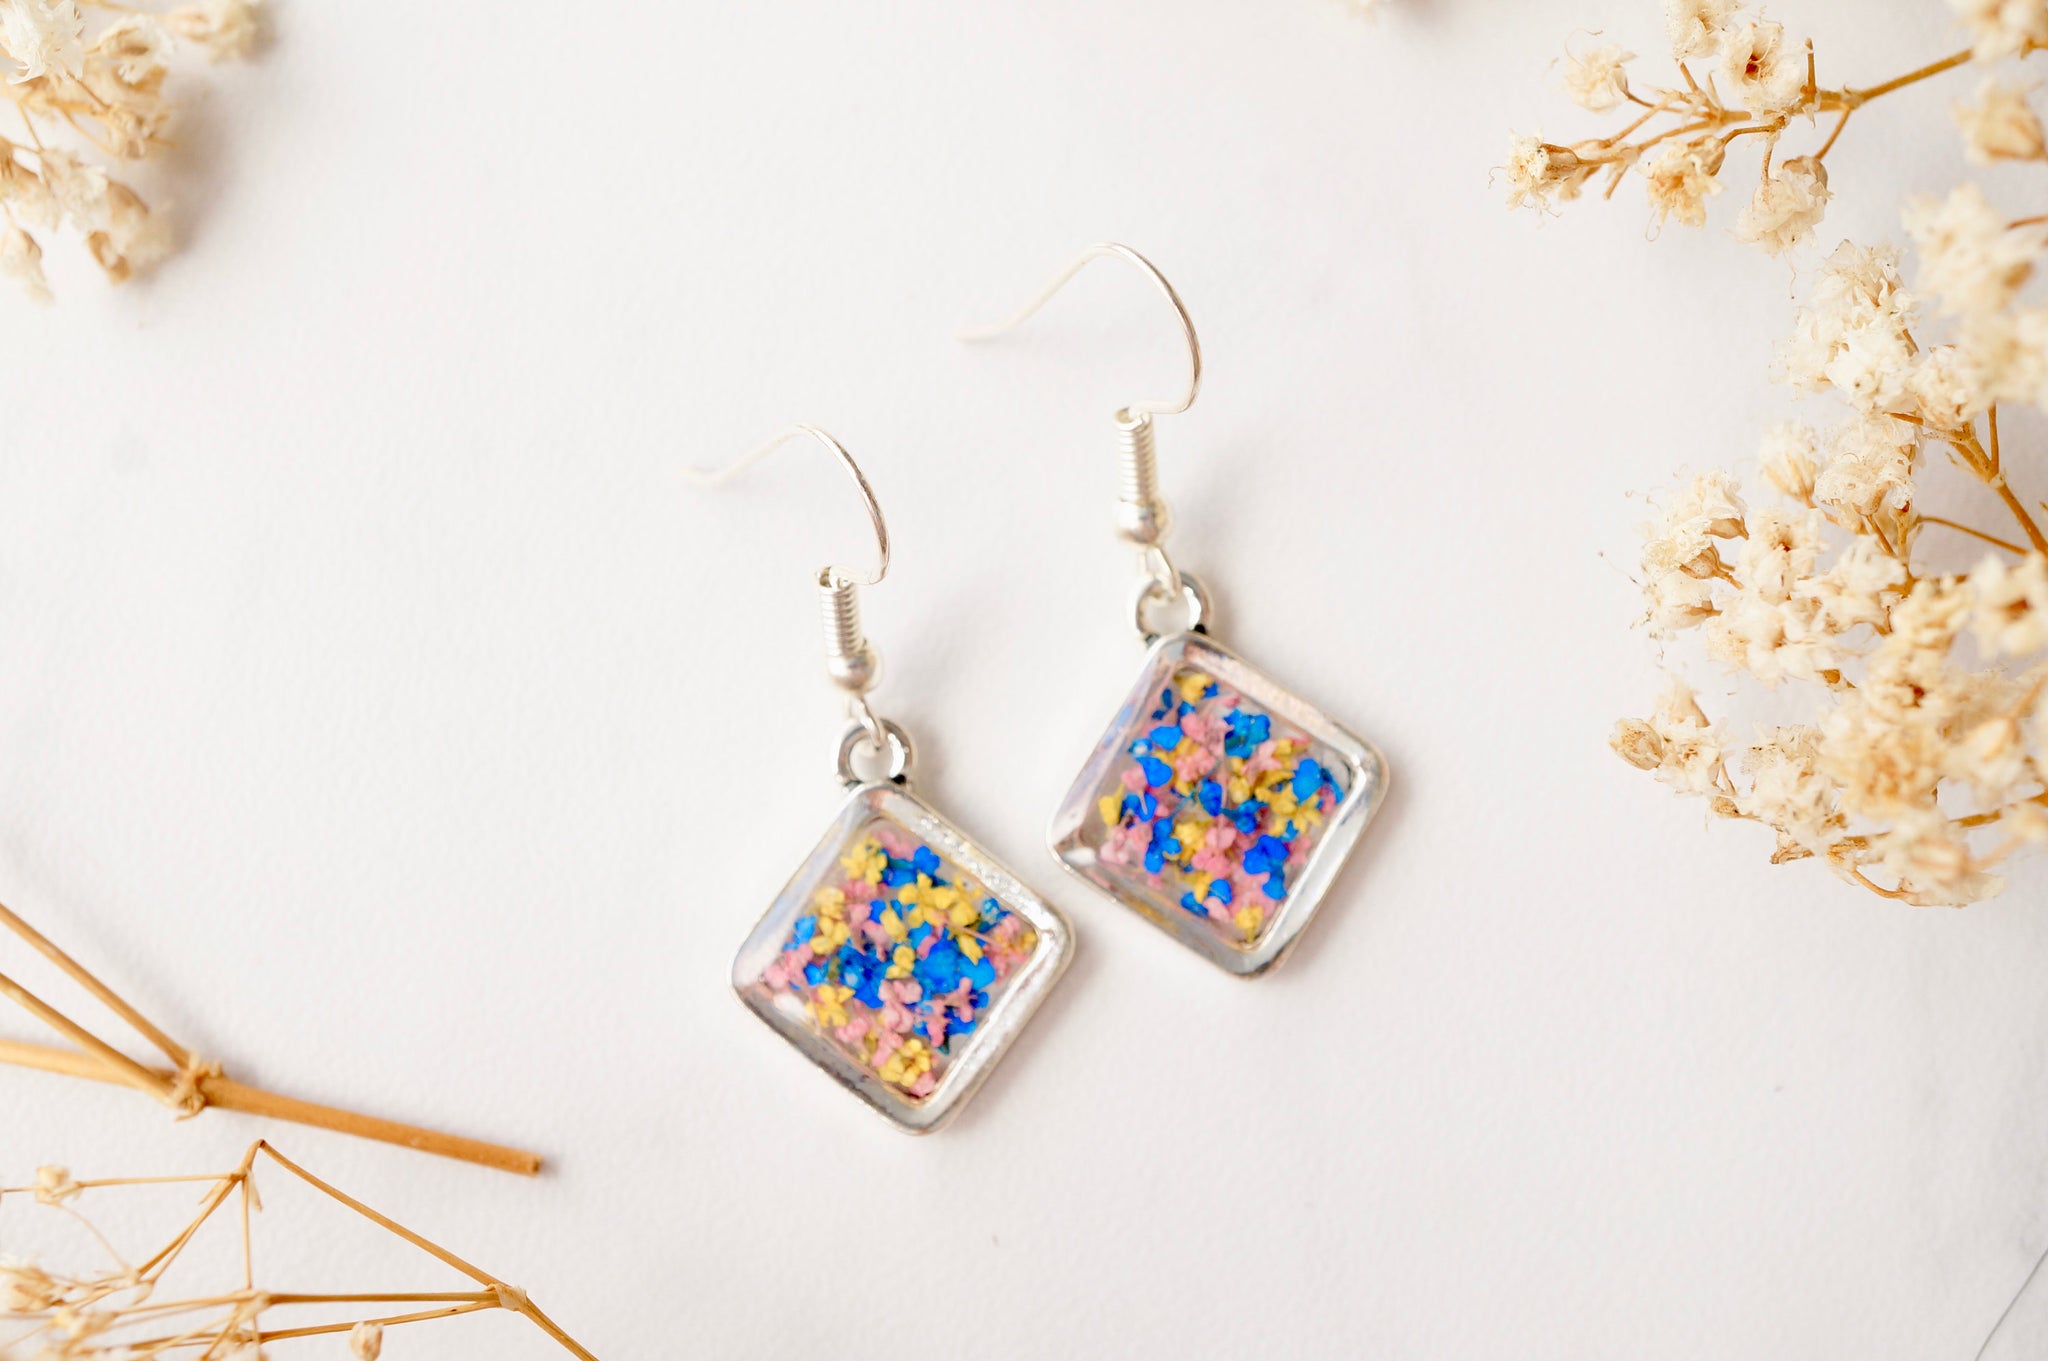 Real Dried Flowers and Resin Earrings, Silver Diamond Drops in